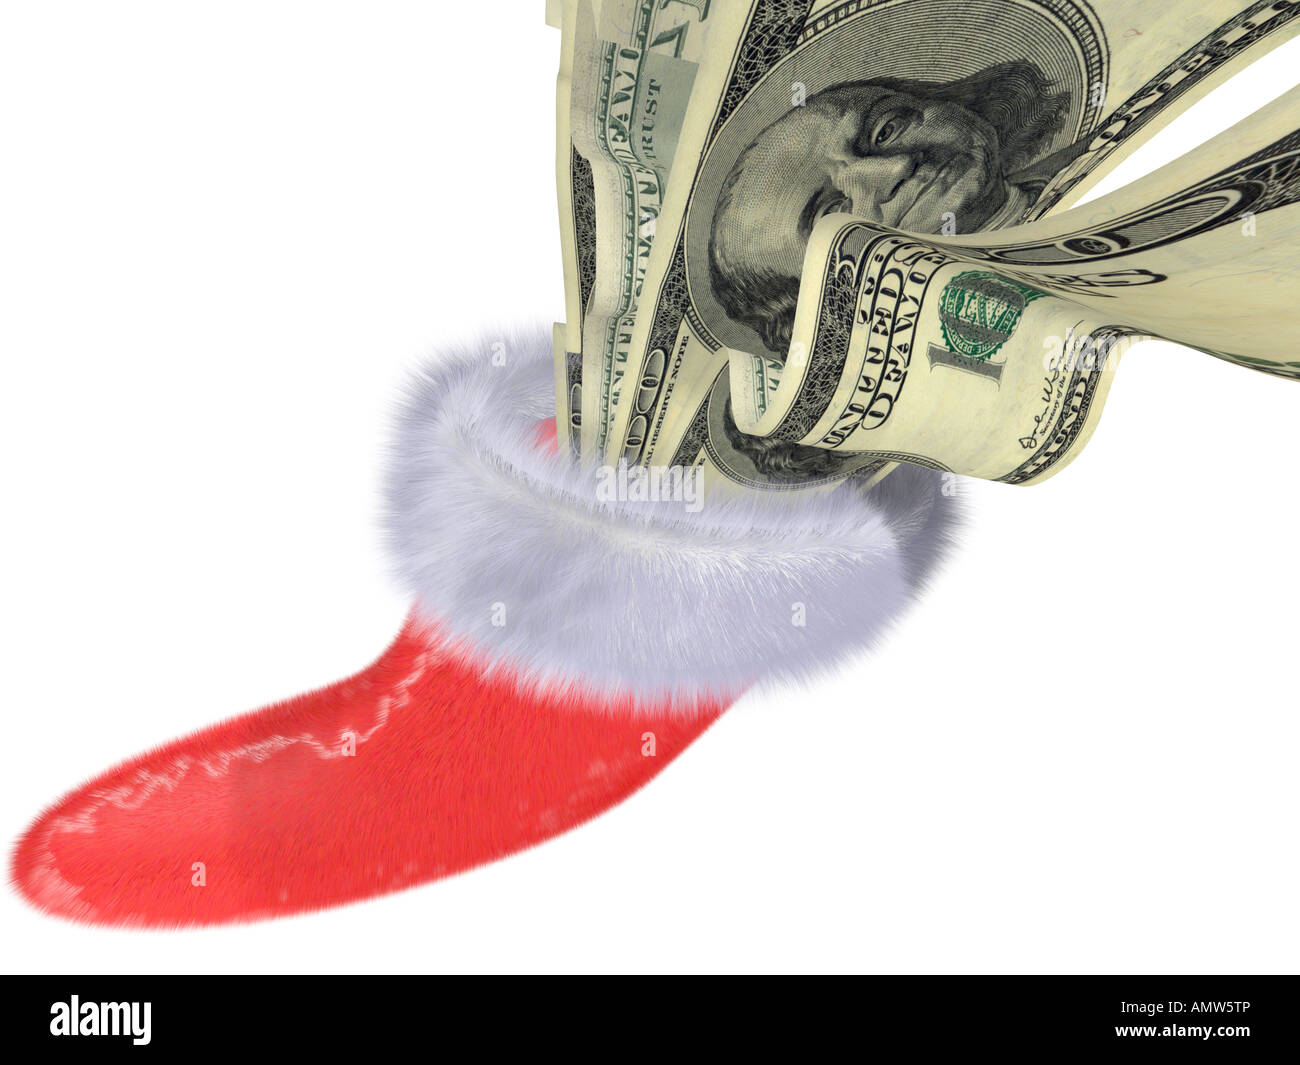 Red fur stocking with the white edging Stock Photo